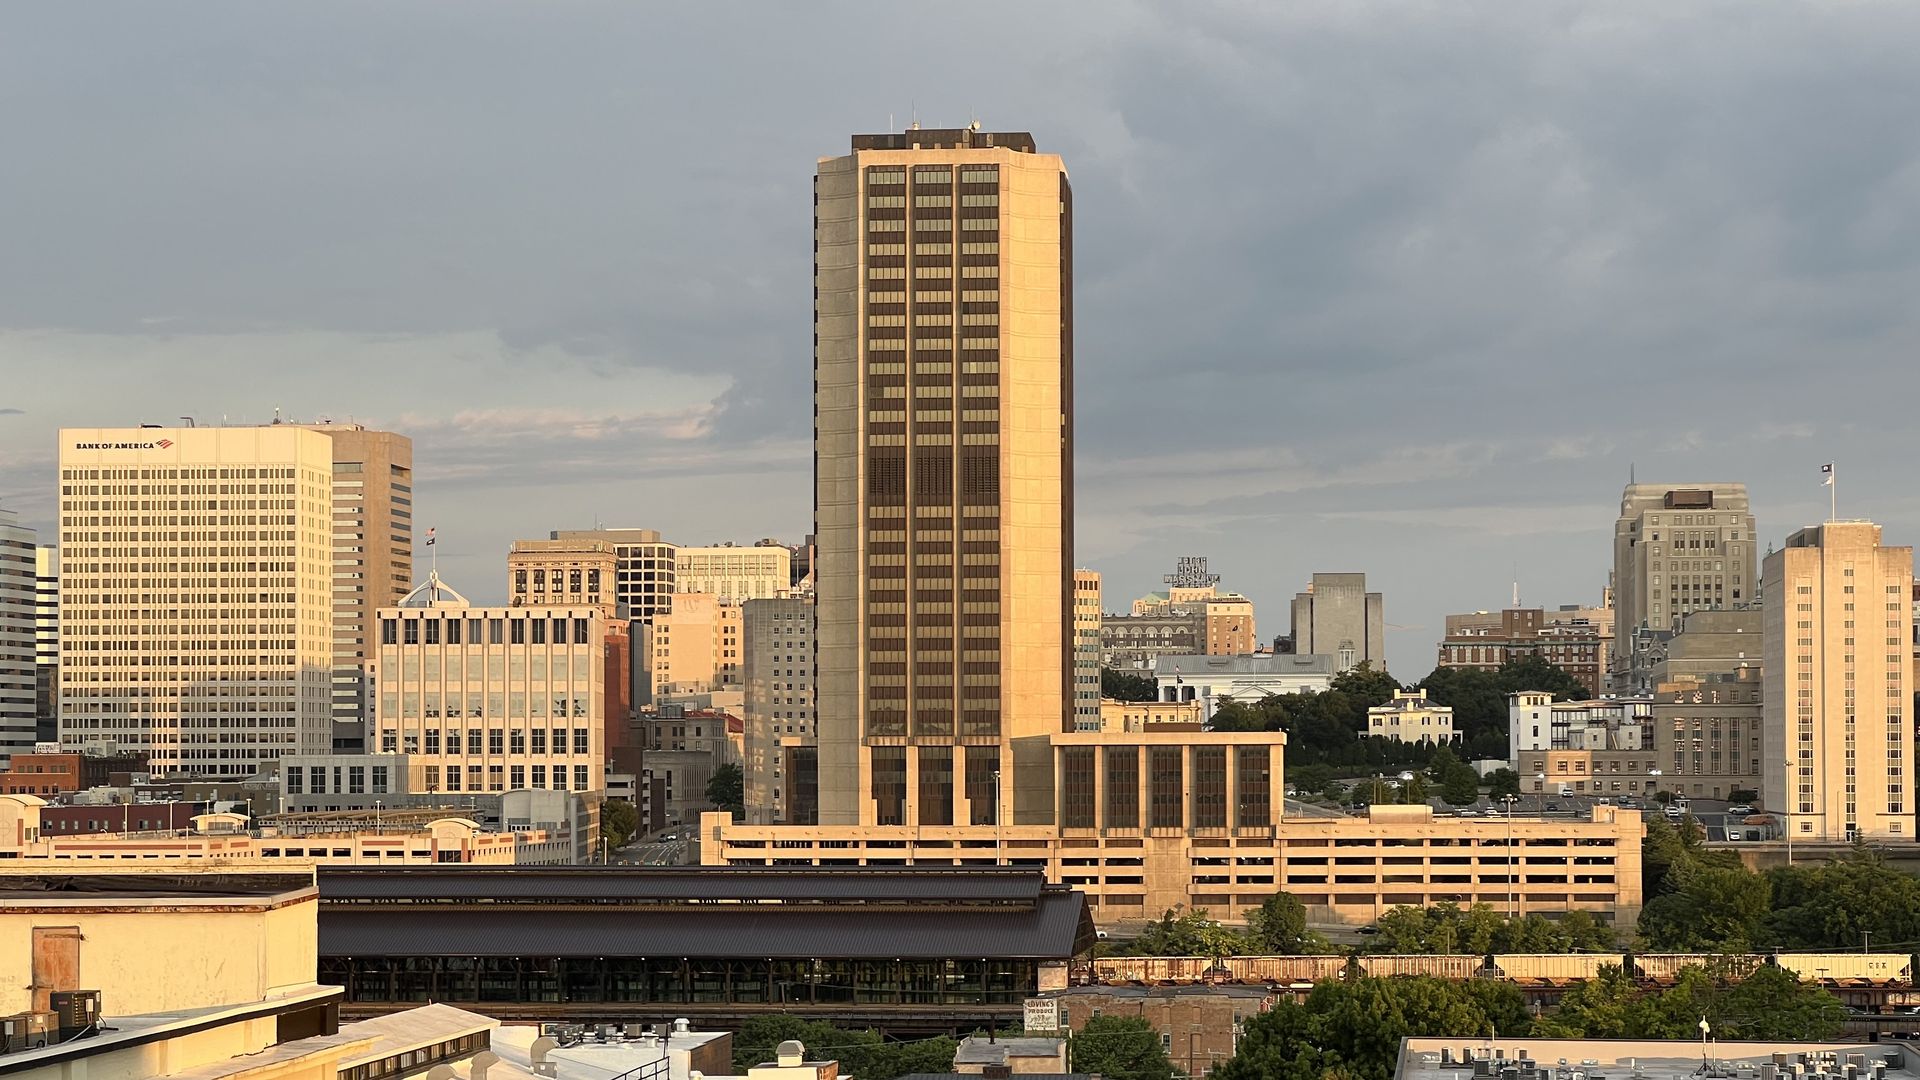 A photograph of the James Monroe building dominating Richmond's skyline.